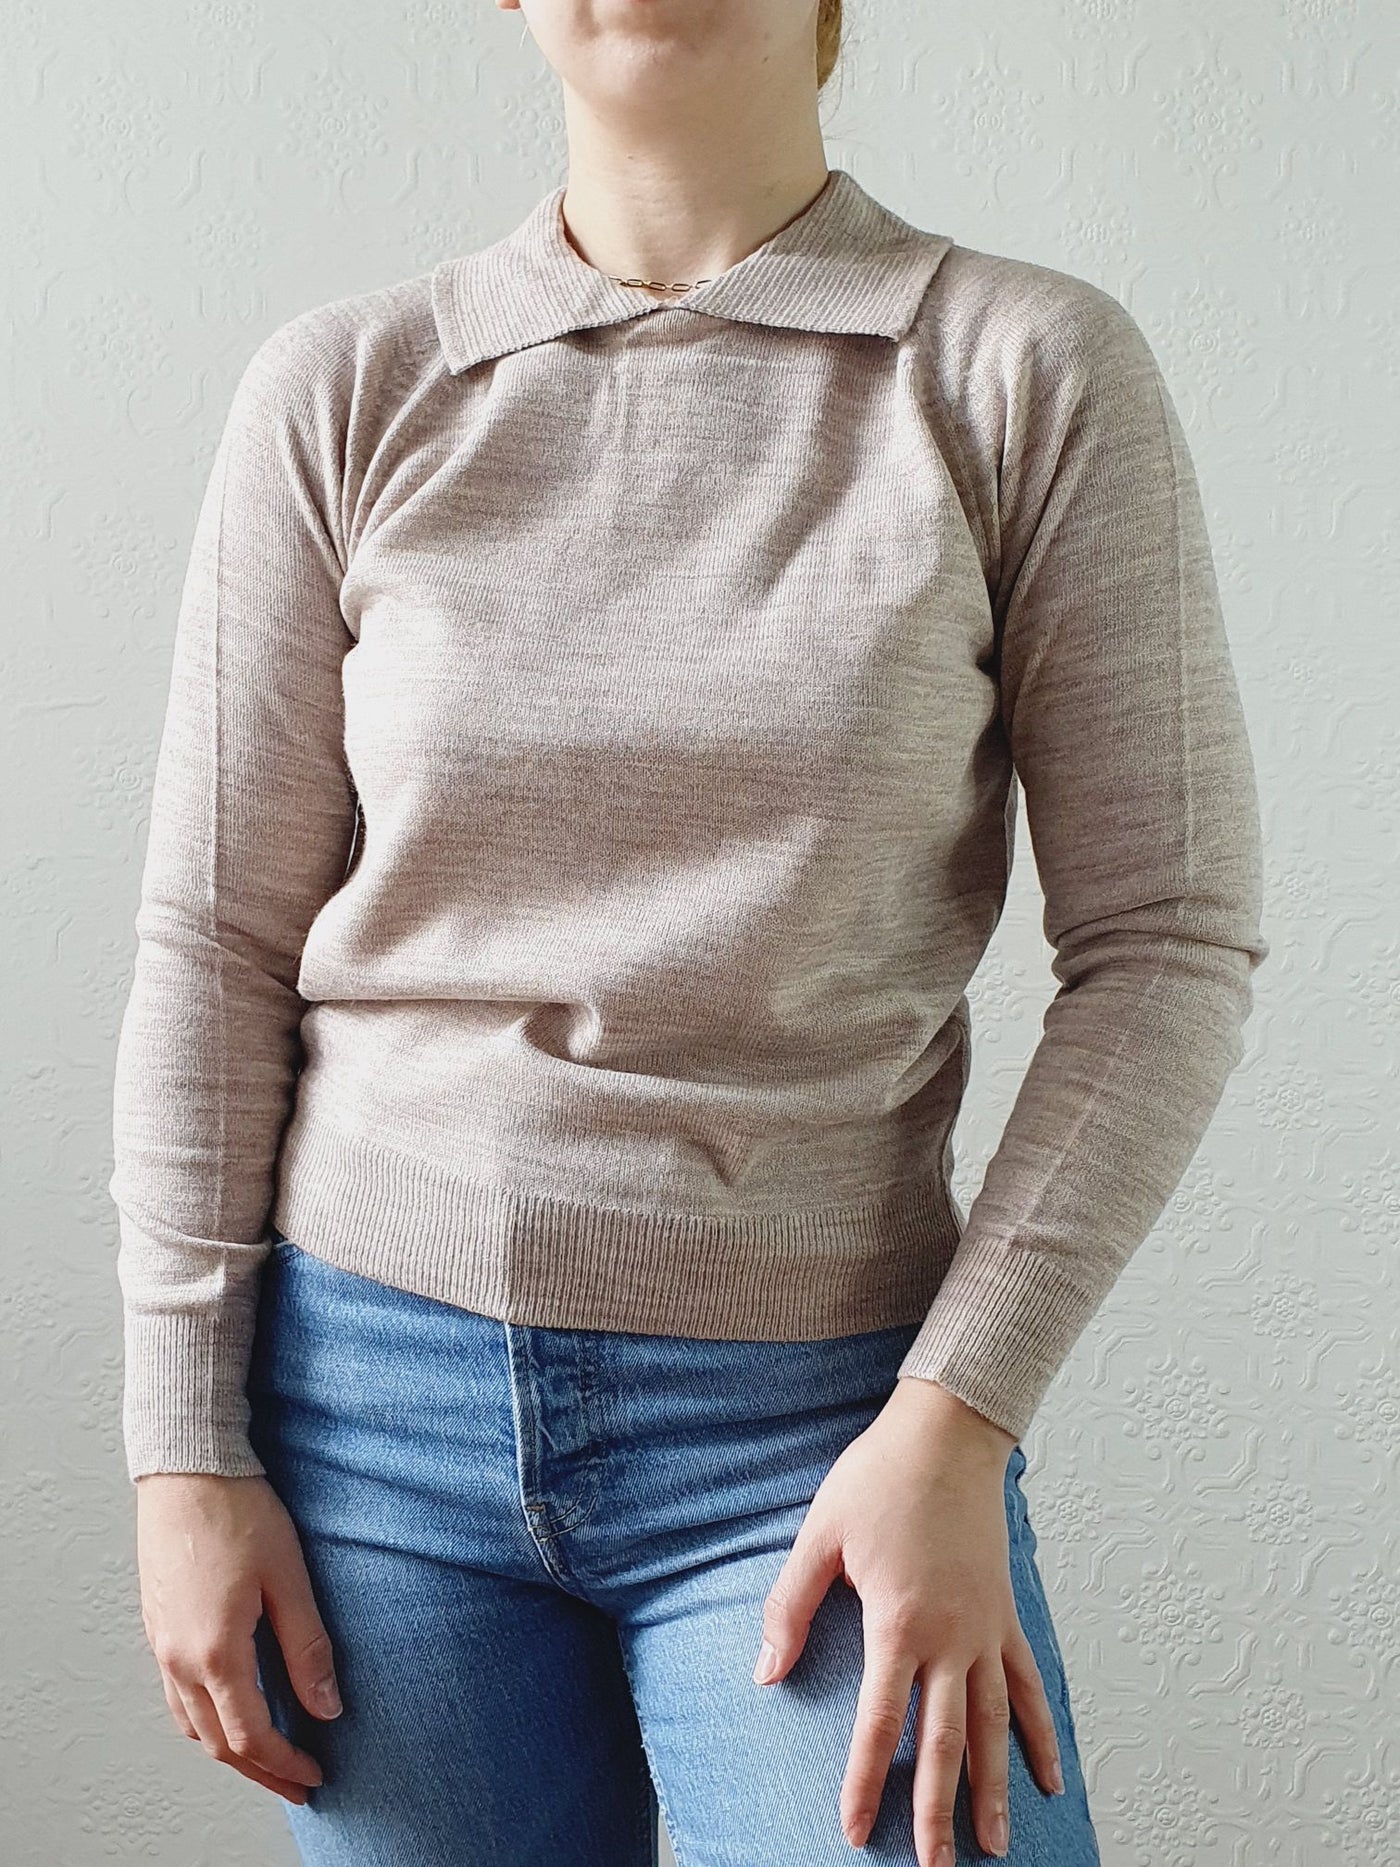 Vintage Taupe Polo Style Long Sleeve Jumper with Collared Neck - XS